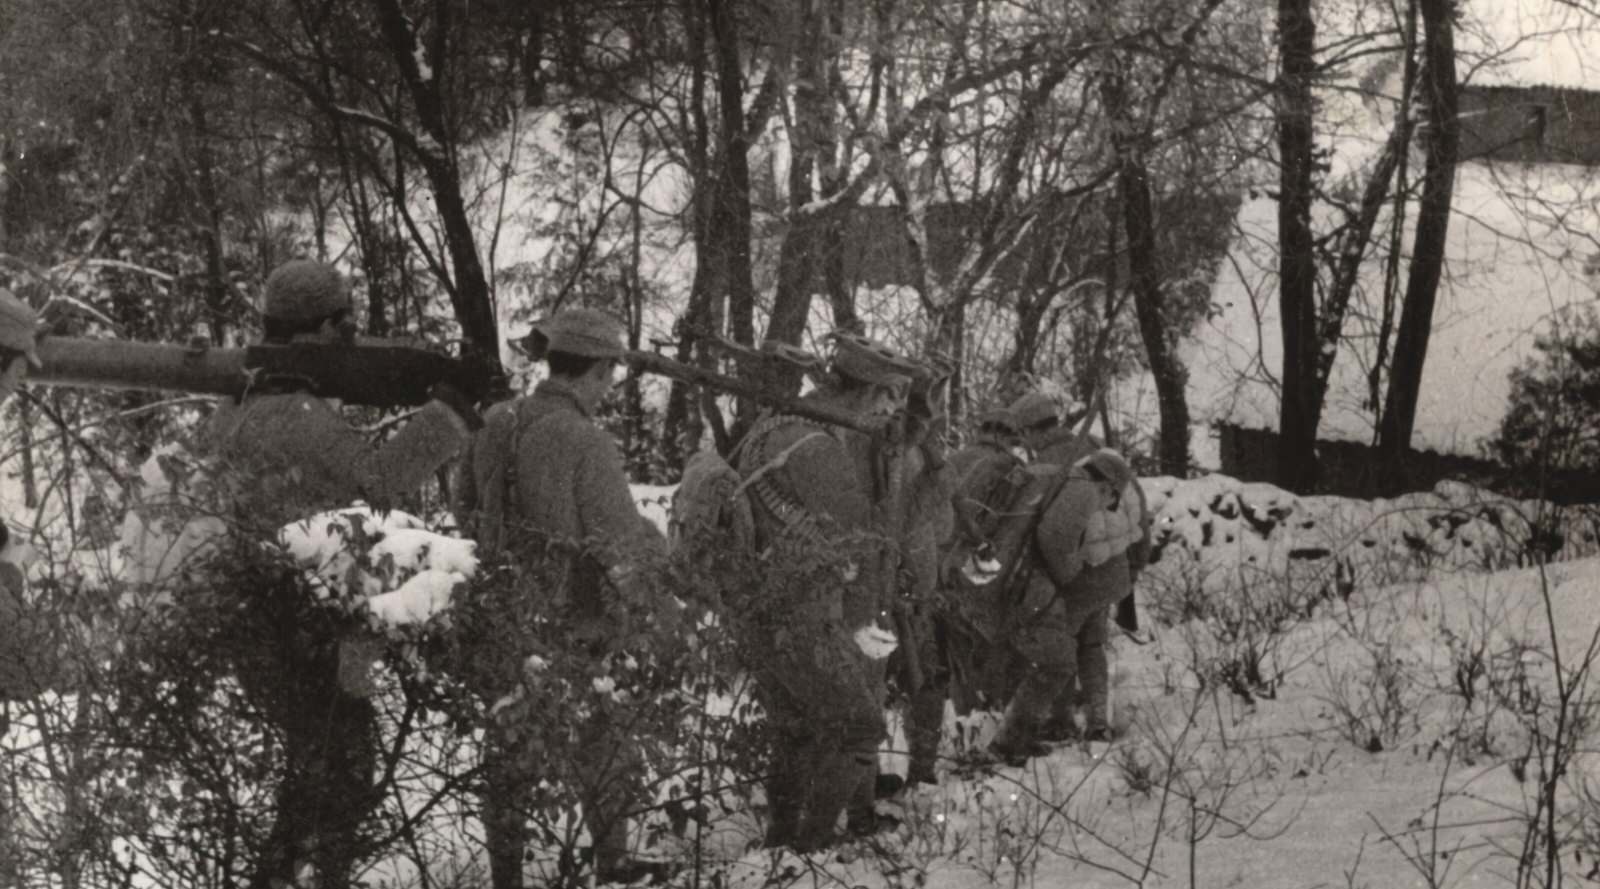 New Fourth Army guerrillas marched against the Japanese During a snowstorm. 1937-1940